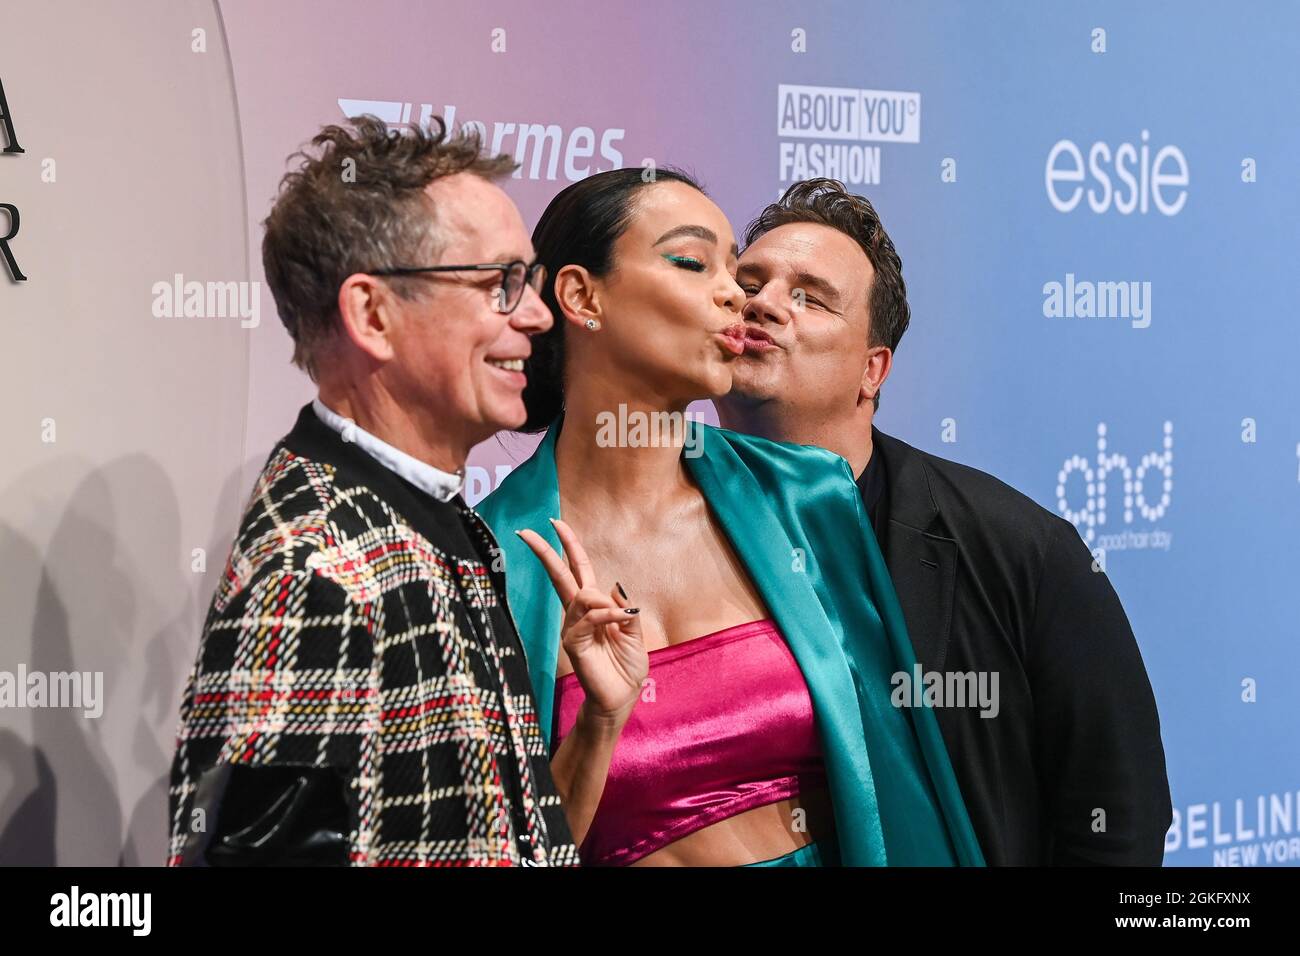 Berlin, Germany. 14th Sep, 2021. Frank Mutters (l-r), Verona Pooth and Guido Maria Kretschmer arrive at the Guido Maria Kretschmer Show at Kraftwerk. About You, or Re-Fashion Week, has been part of Berlin Fashion Week since 2021. About You Fashion Week runs from 11 to 15 September 2021. Credit: Jens Kalaene/dpa/Alamy Live News Stock Photo